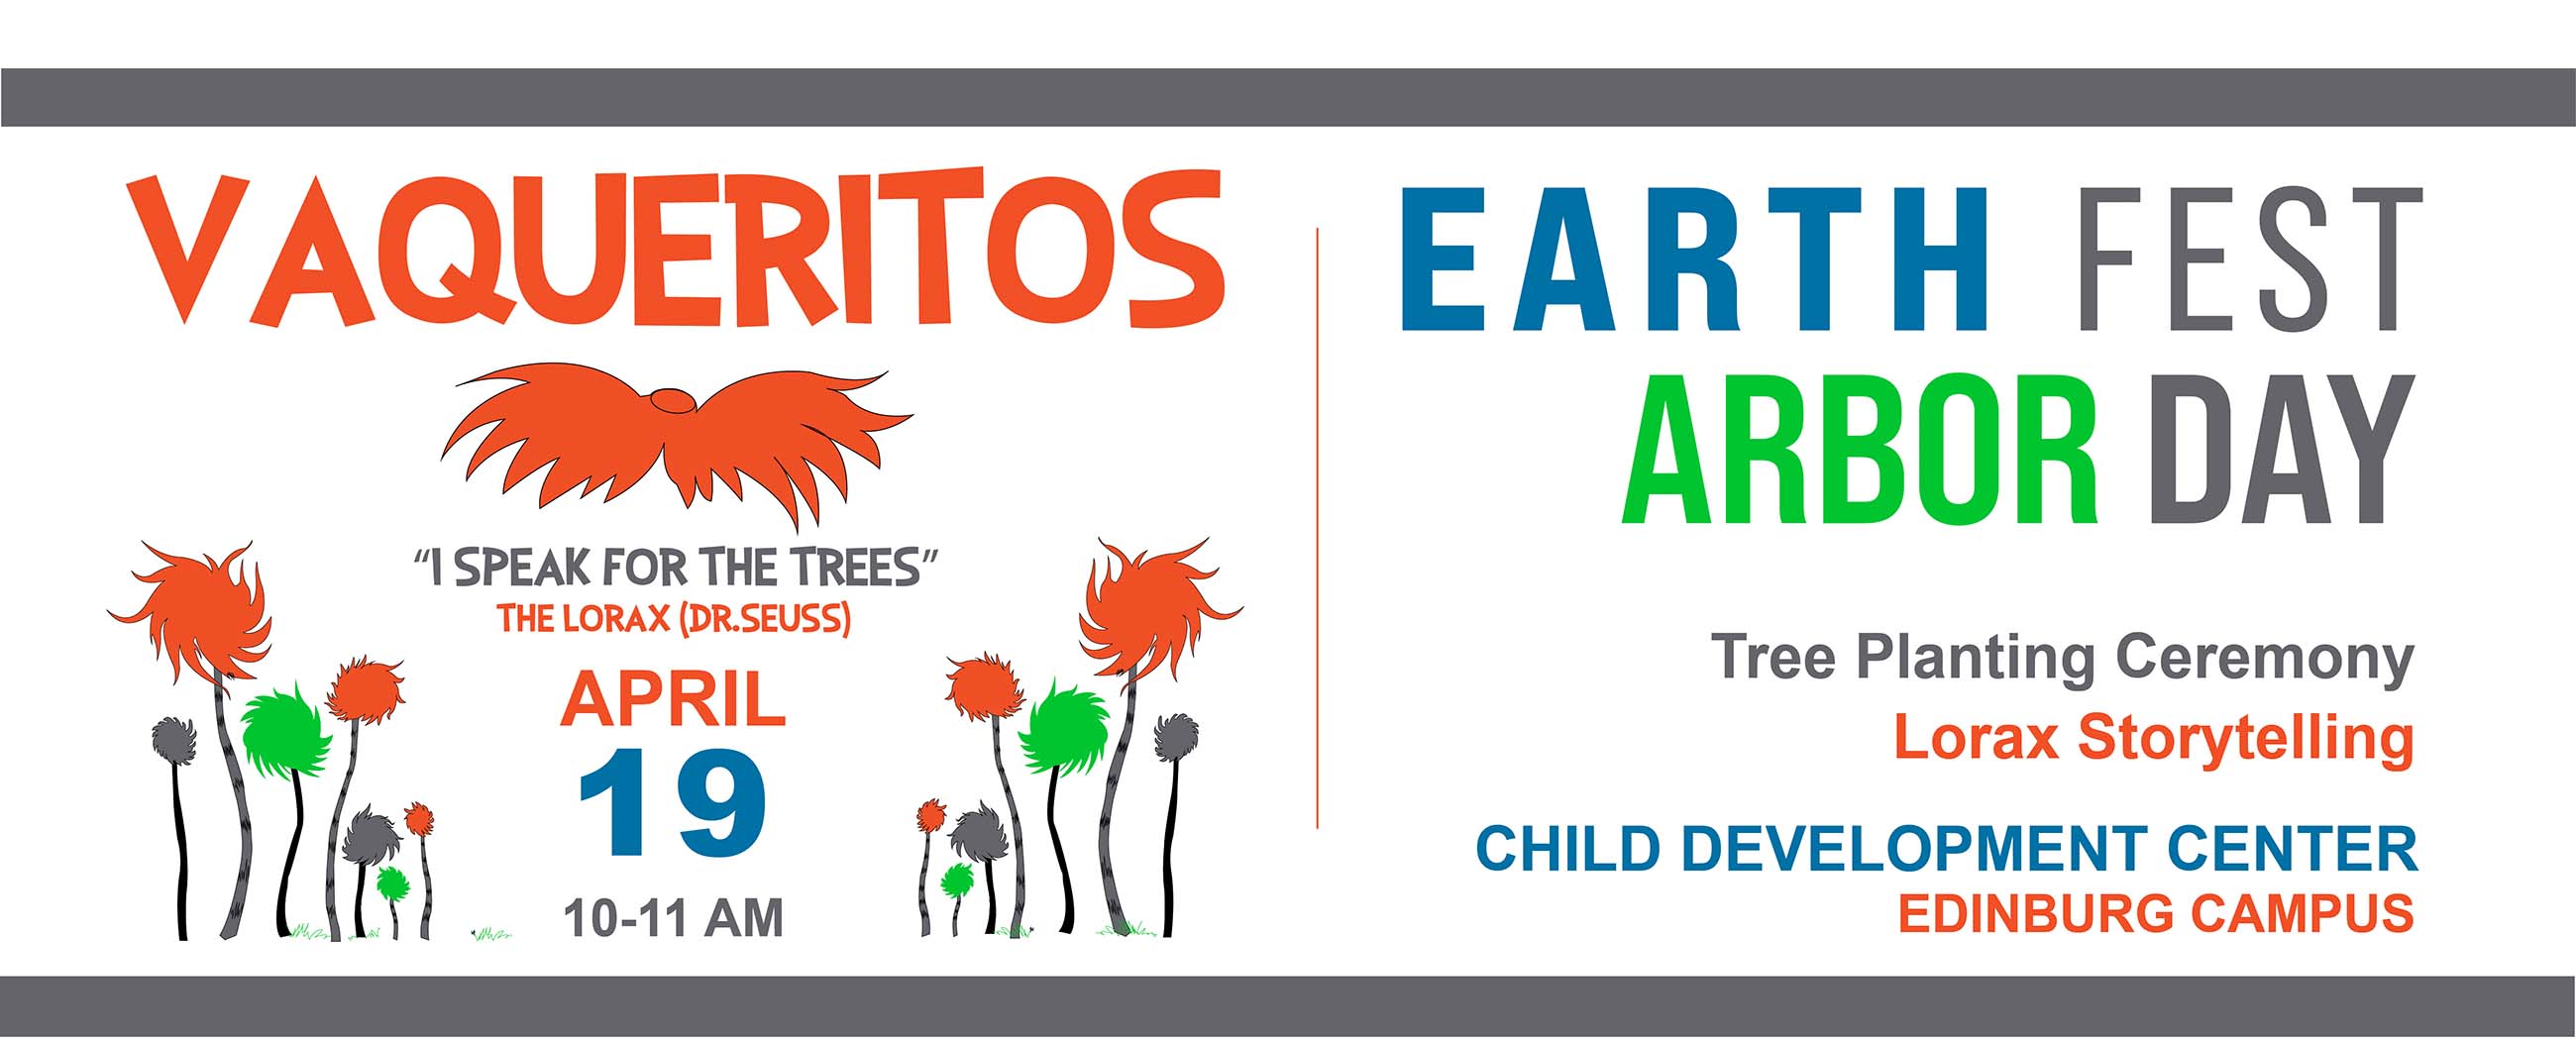 Vaqueritos, I speak for the trees. The Lorax (Dr. Seuss) April 19 10-11 AM. Earth Fest Arbor Day. Tree Planting Ceremony Lorax Storytelling Child Development Center Edinburg Campus. Page Banner 